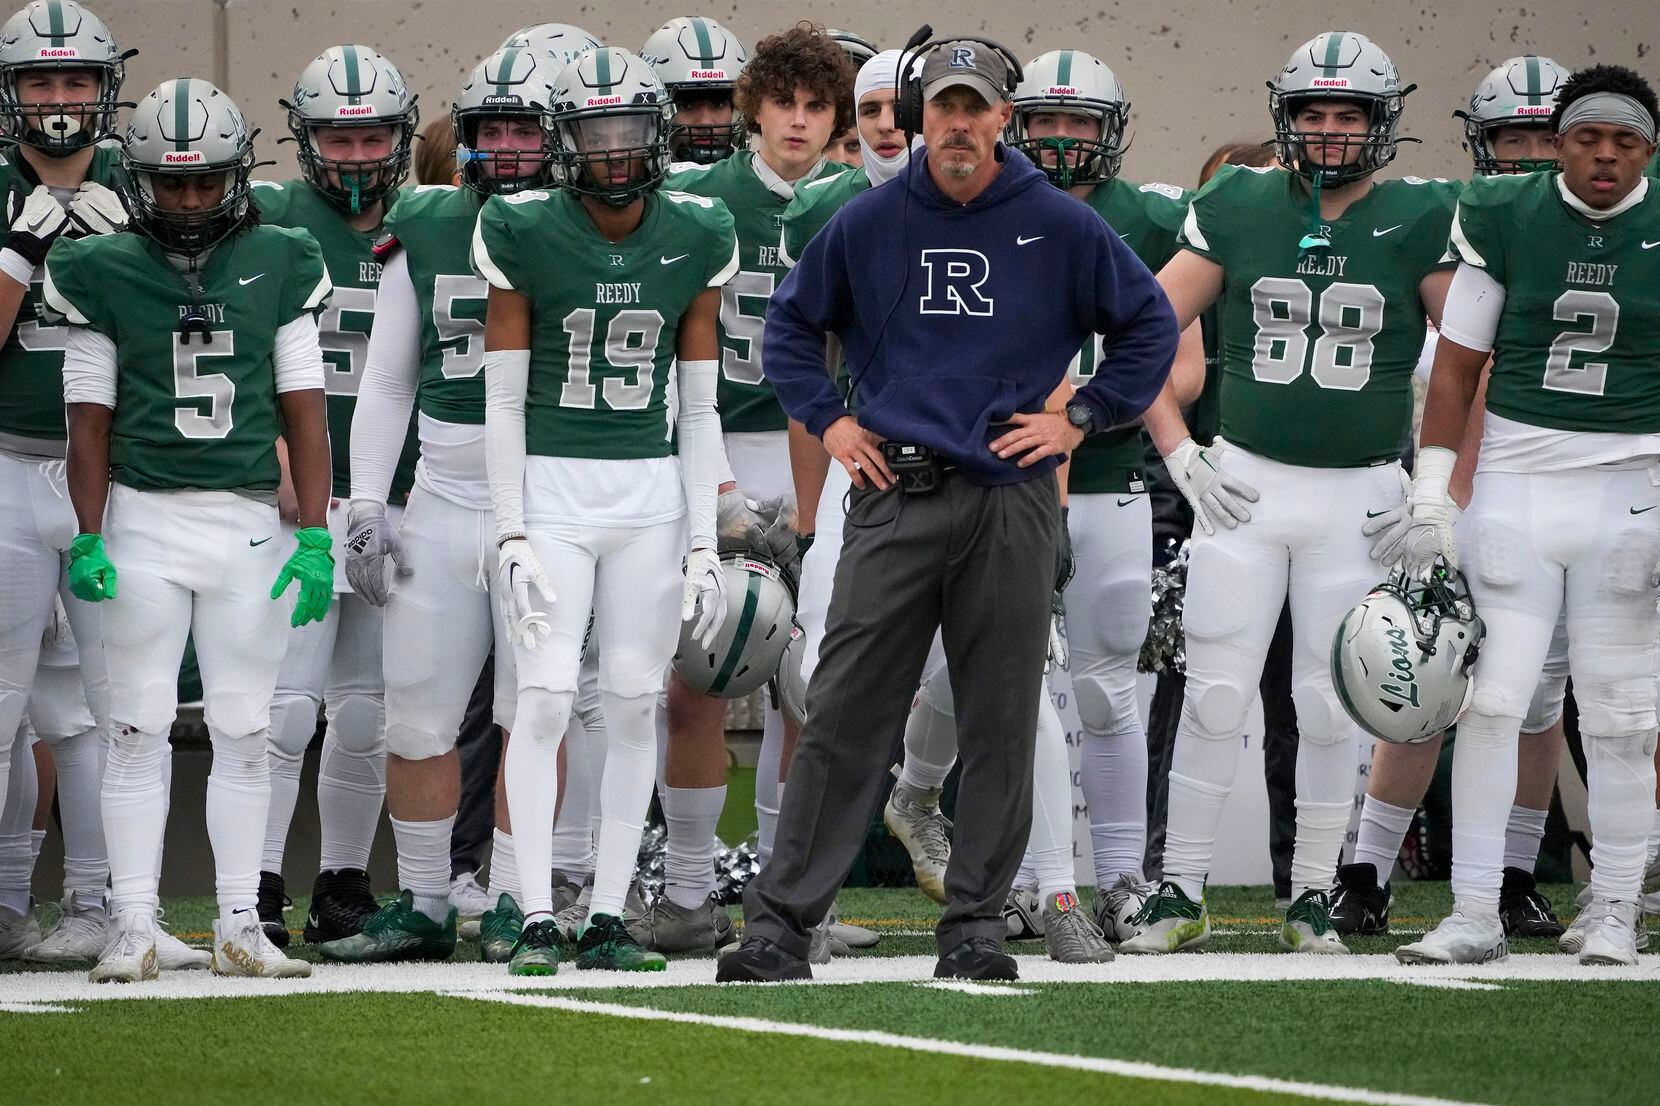 Frisco Reedy head coach Chad Cole head coach Chad Cole looks on from the sidelines during...